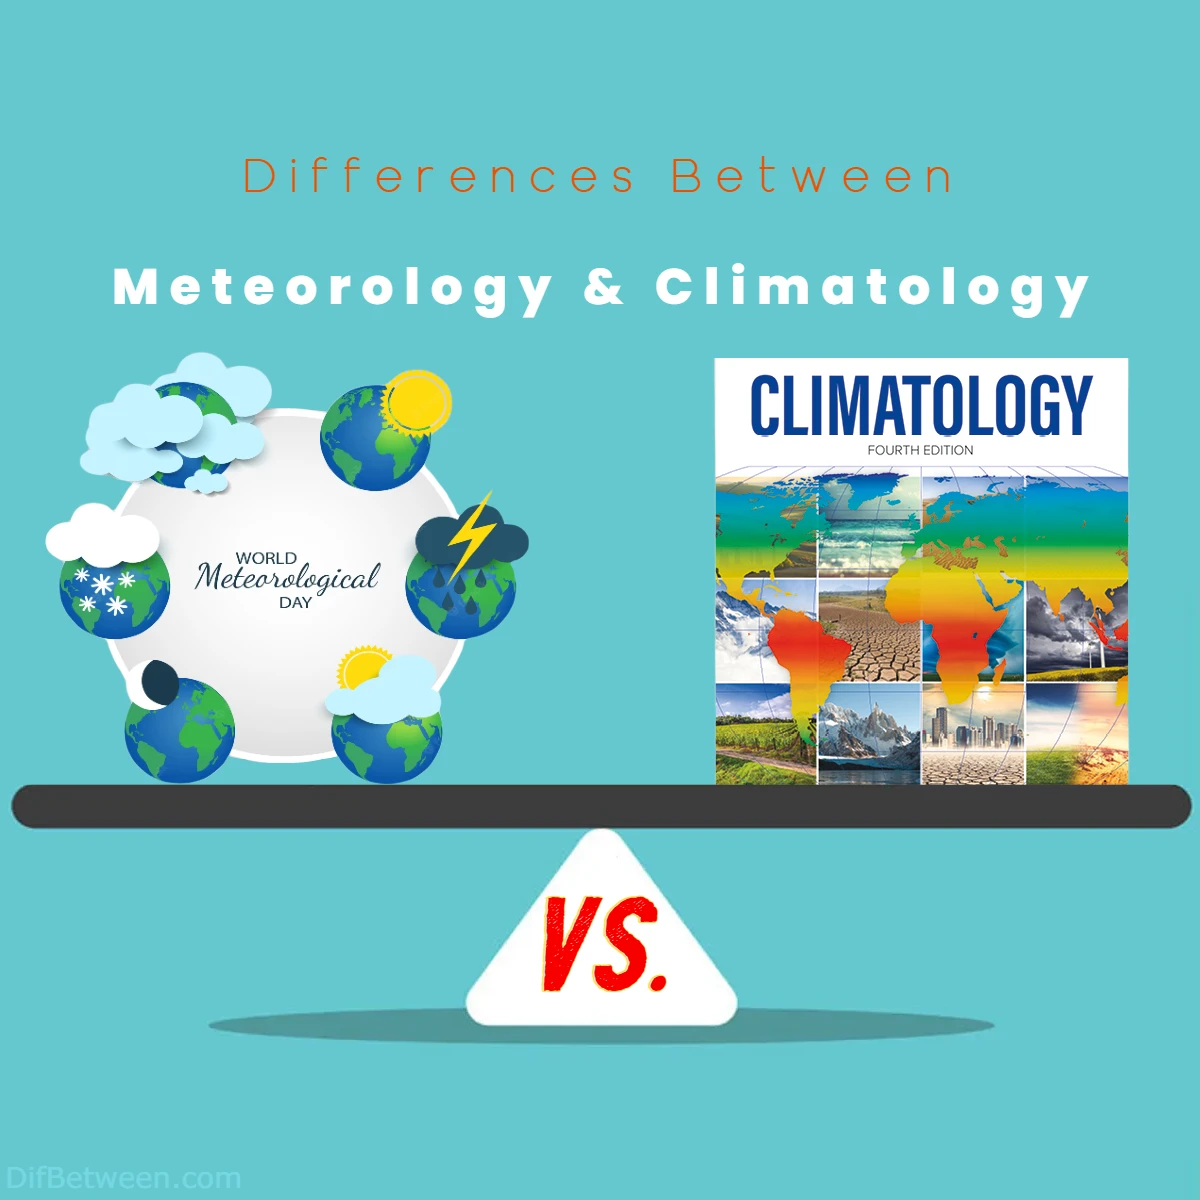 Differences Between Chemical Meteorology vs Climatology